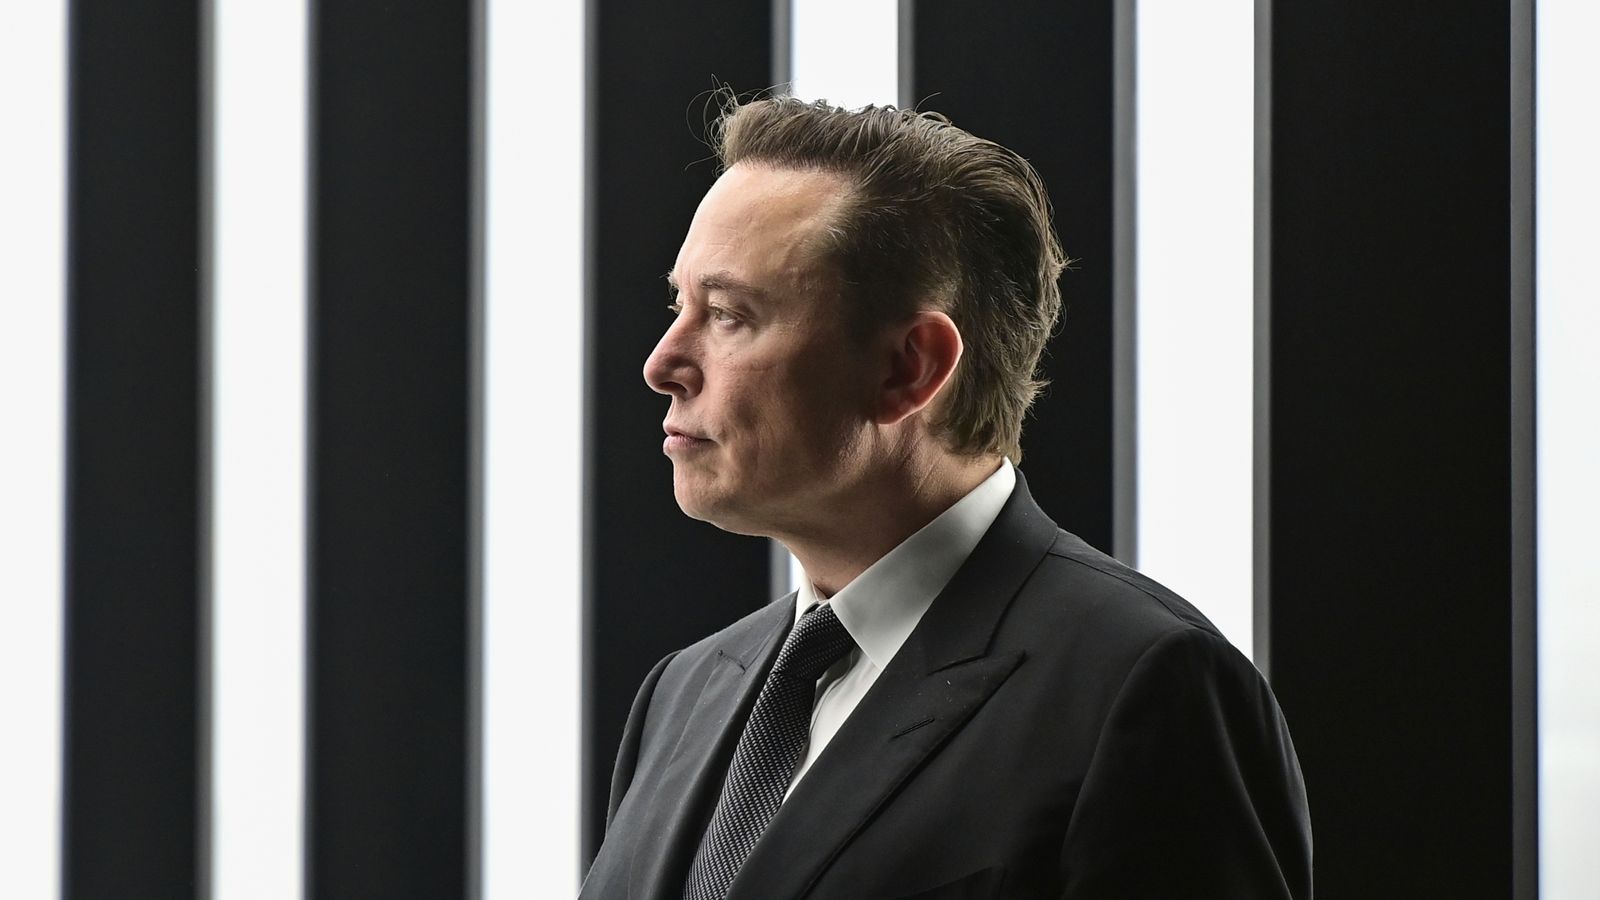 'Unfortunately, there is no choice': Elon Musk defends culling Twitter staff